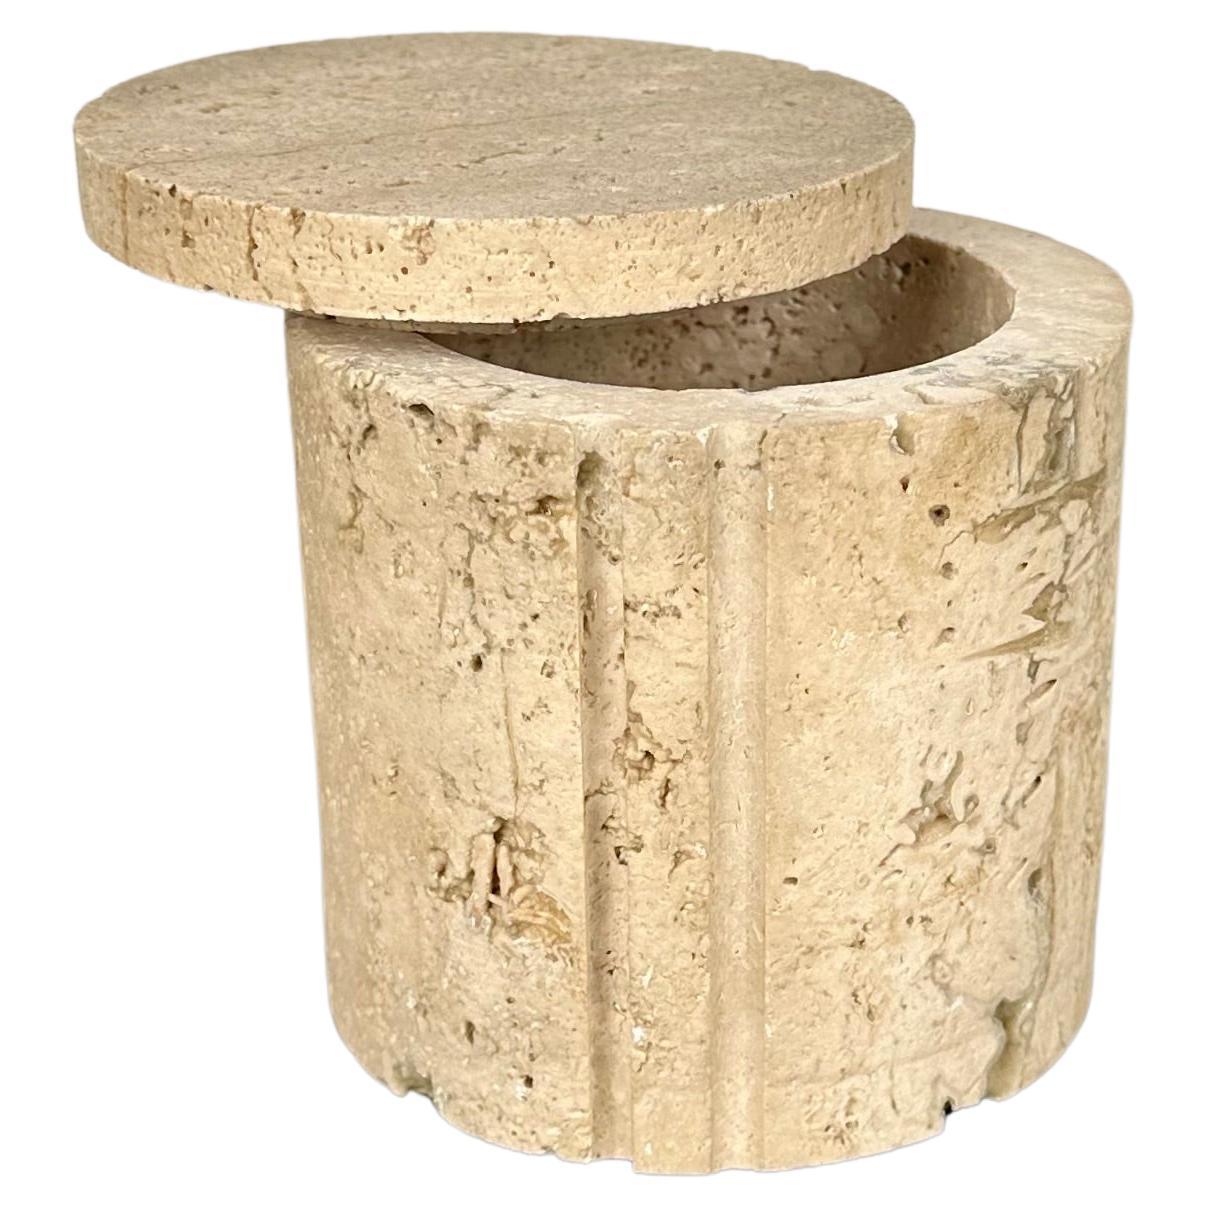 Midcentury Decorative Box in Travertine by Fratelli Mannelli, Italy, 1970s For Sale